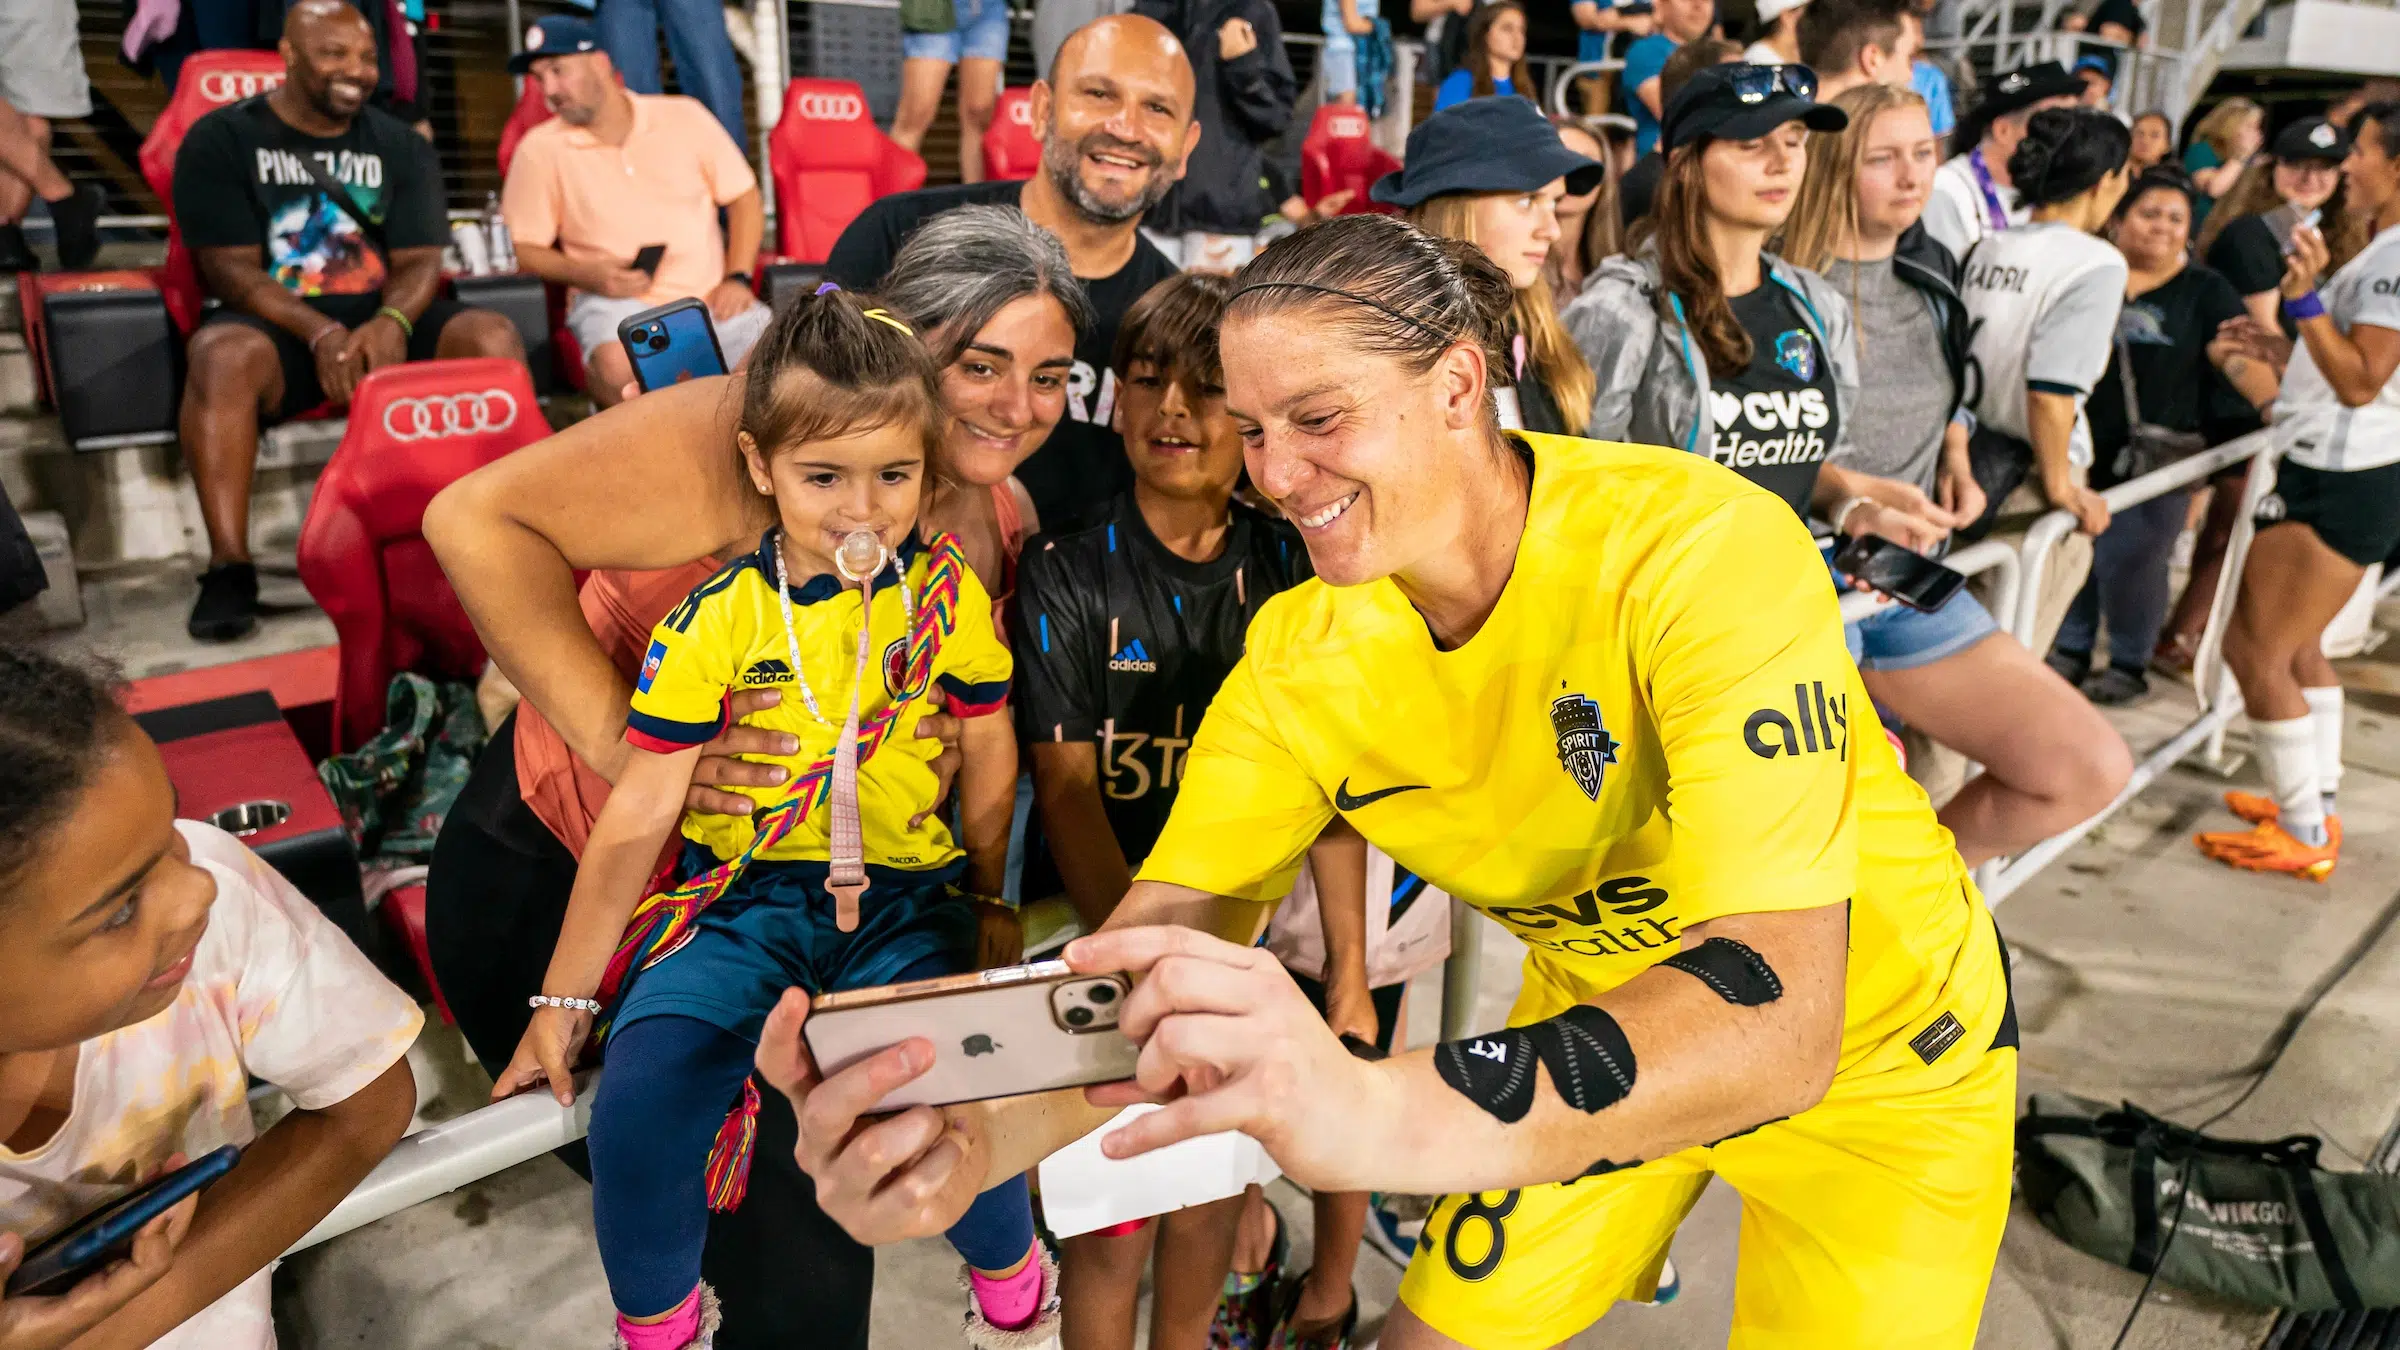 Nicole Barnhart in a yellow uniform takes a selfie on an iPhone with two young fans and their families.